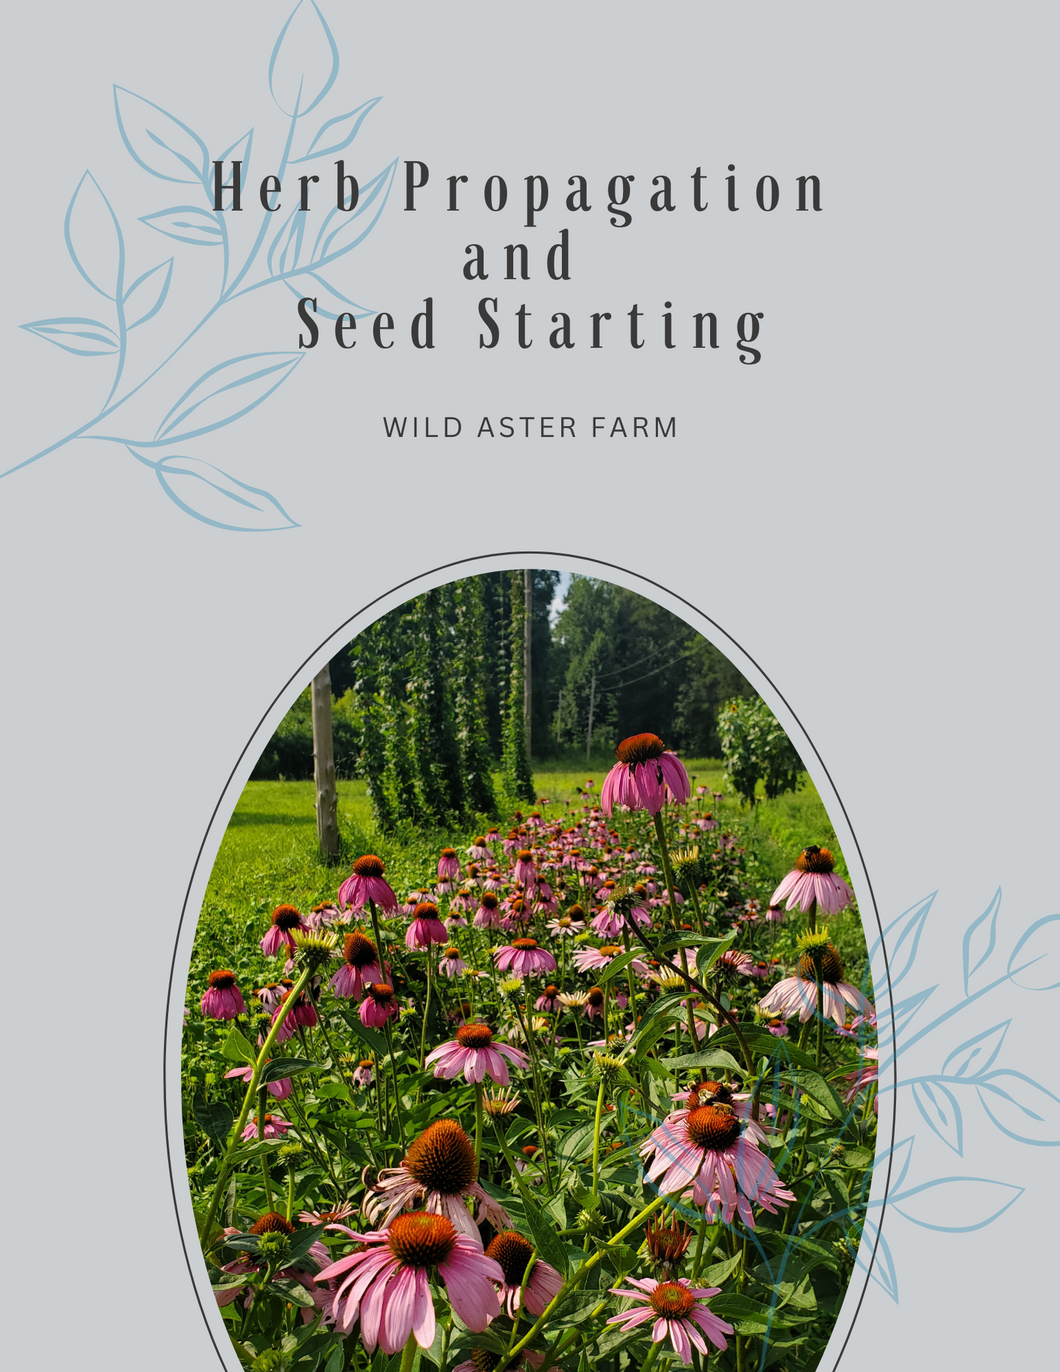 Herb Propagation and Seed Starting Booklet